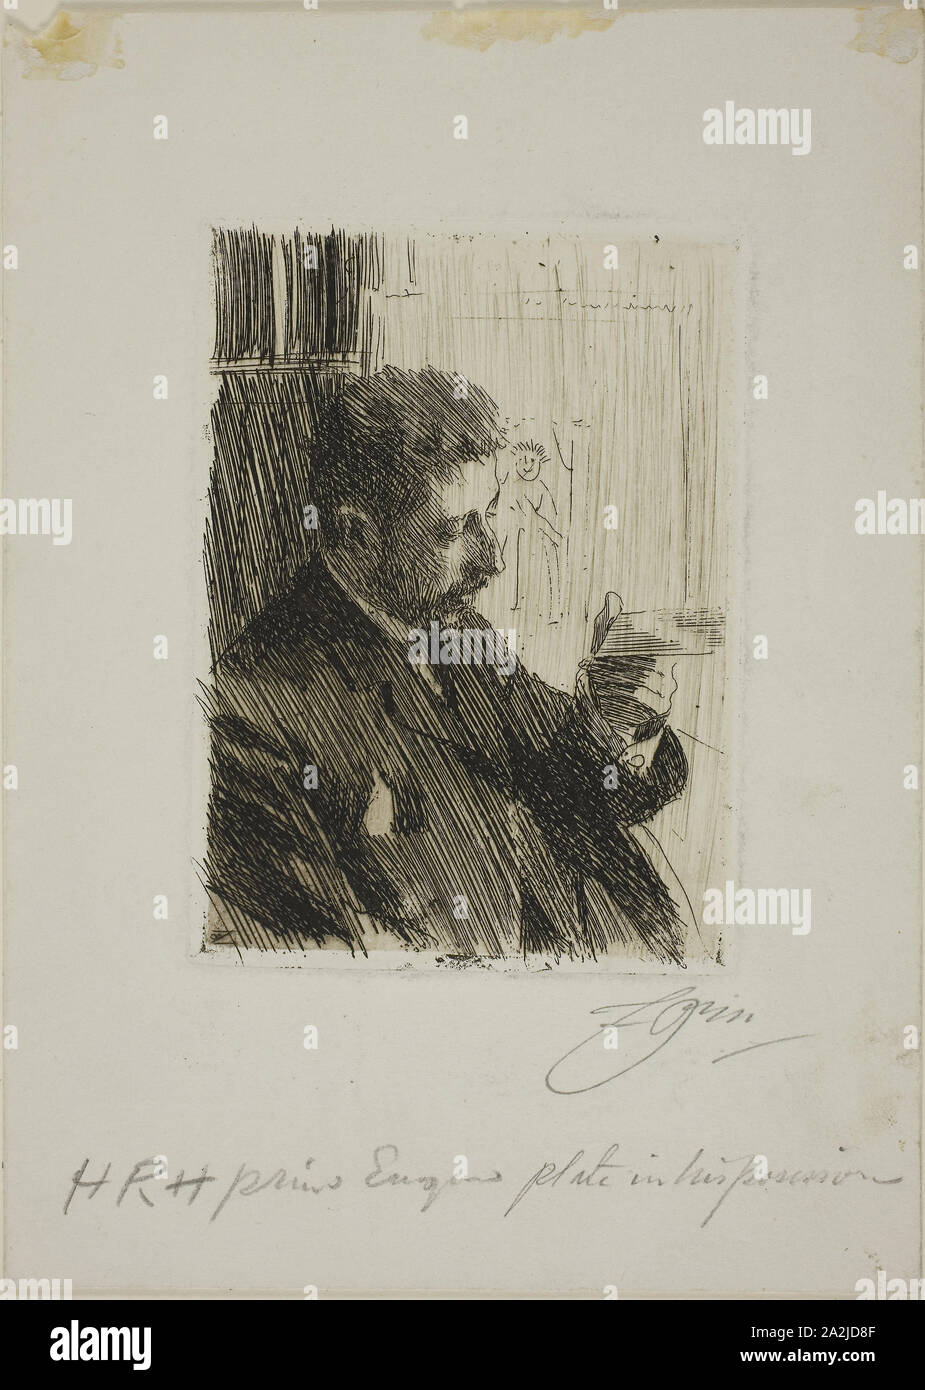 H. R. H. Prince Eugen of Sweden, 1891, Anders Zorn, Swedish, 1860-1920, Sweden, Etching on white wove paper, 134 x 96 mm (image), 140 x 102 mm (plate), 239 x 171 mm (sheet Stock Photo